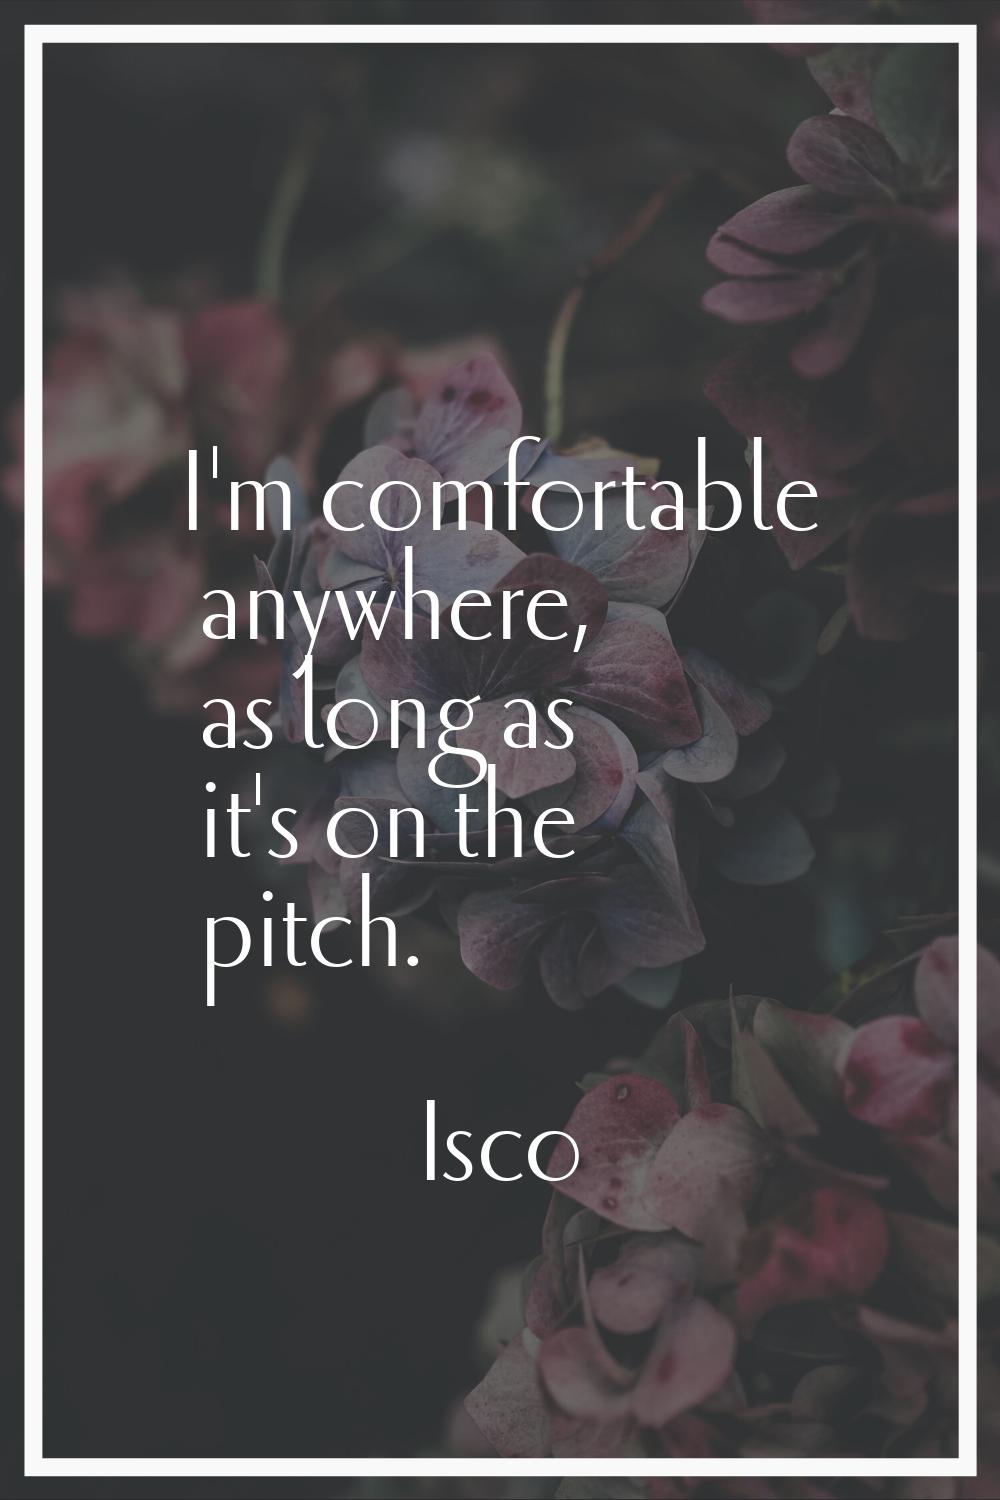 I'm comfortable anywhere, as long as it's on the pitch.